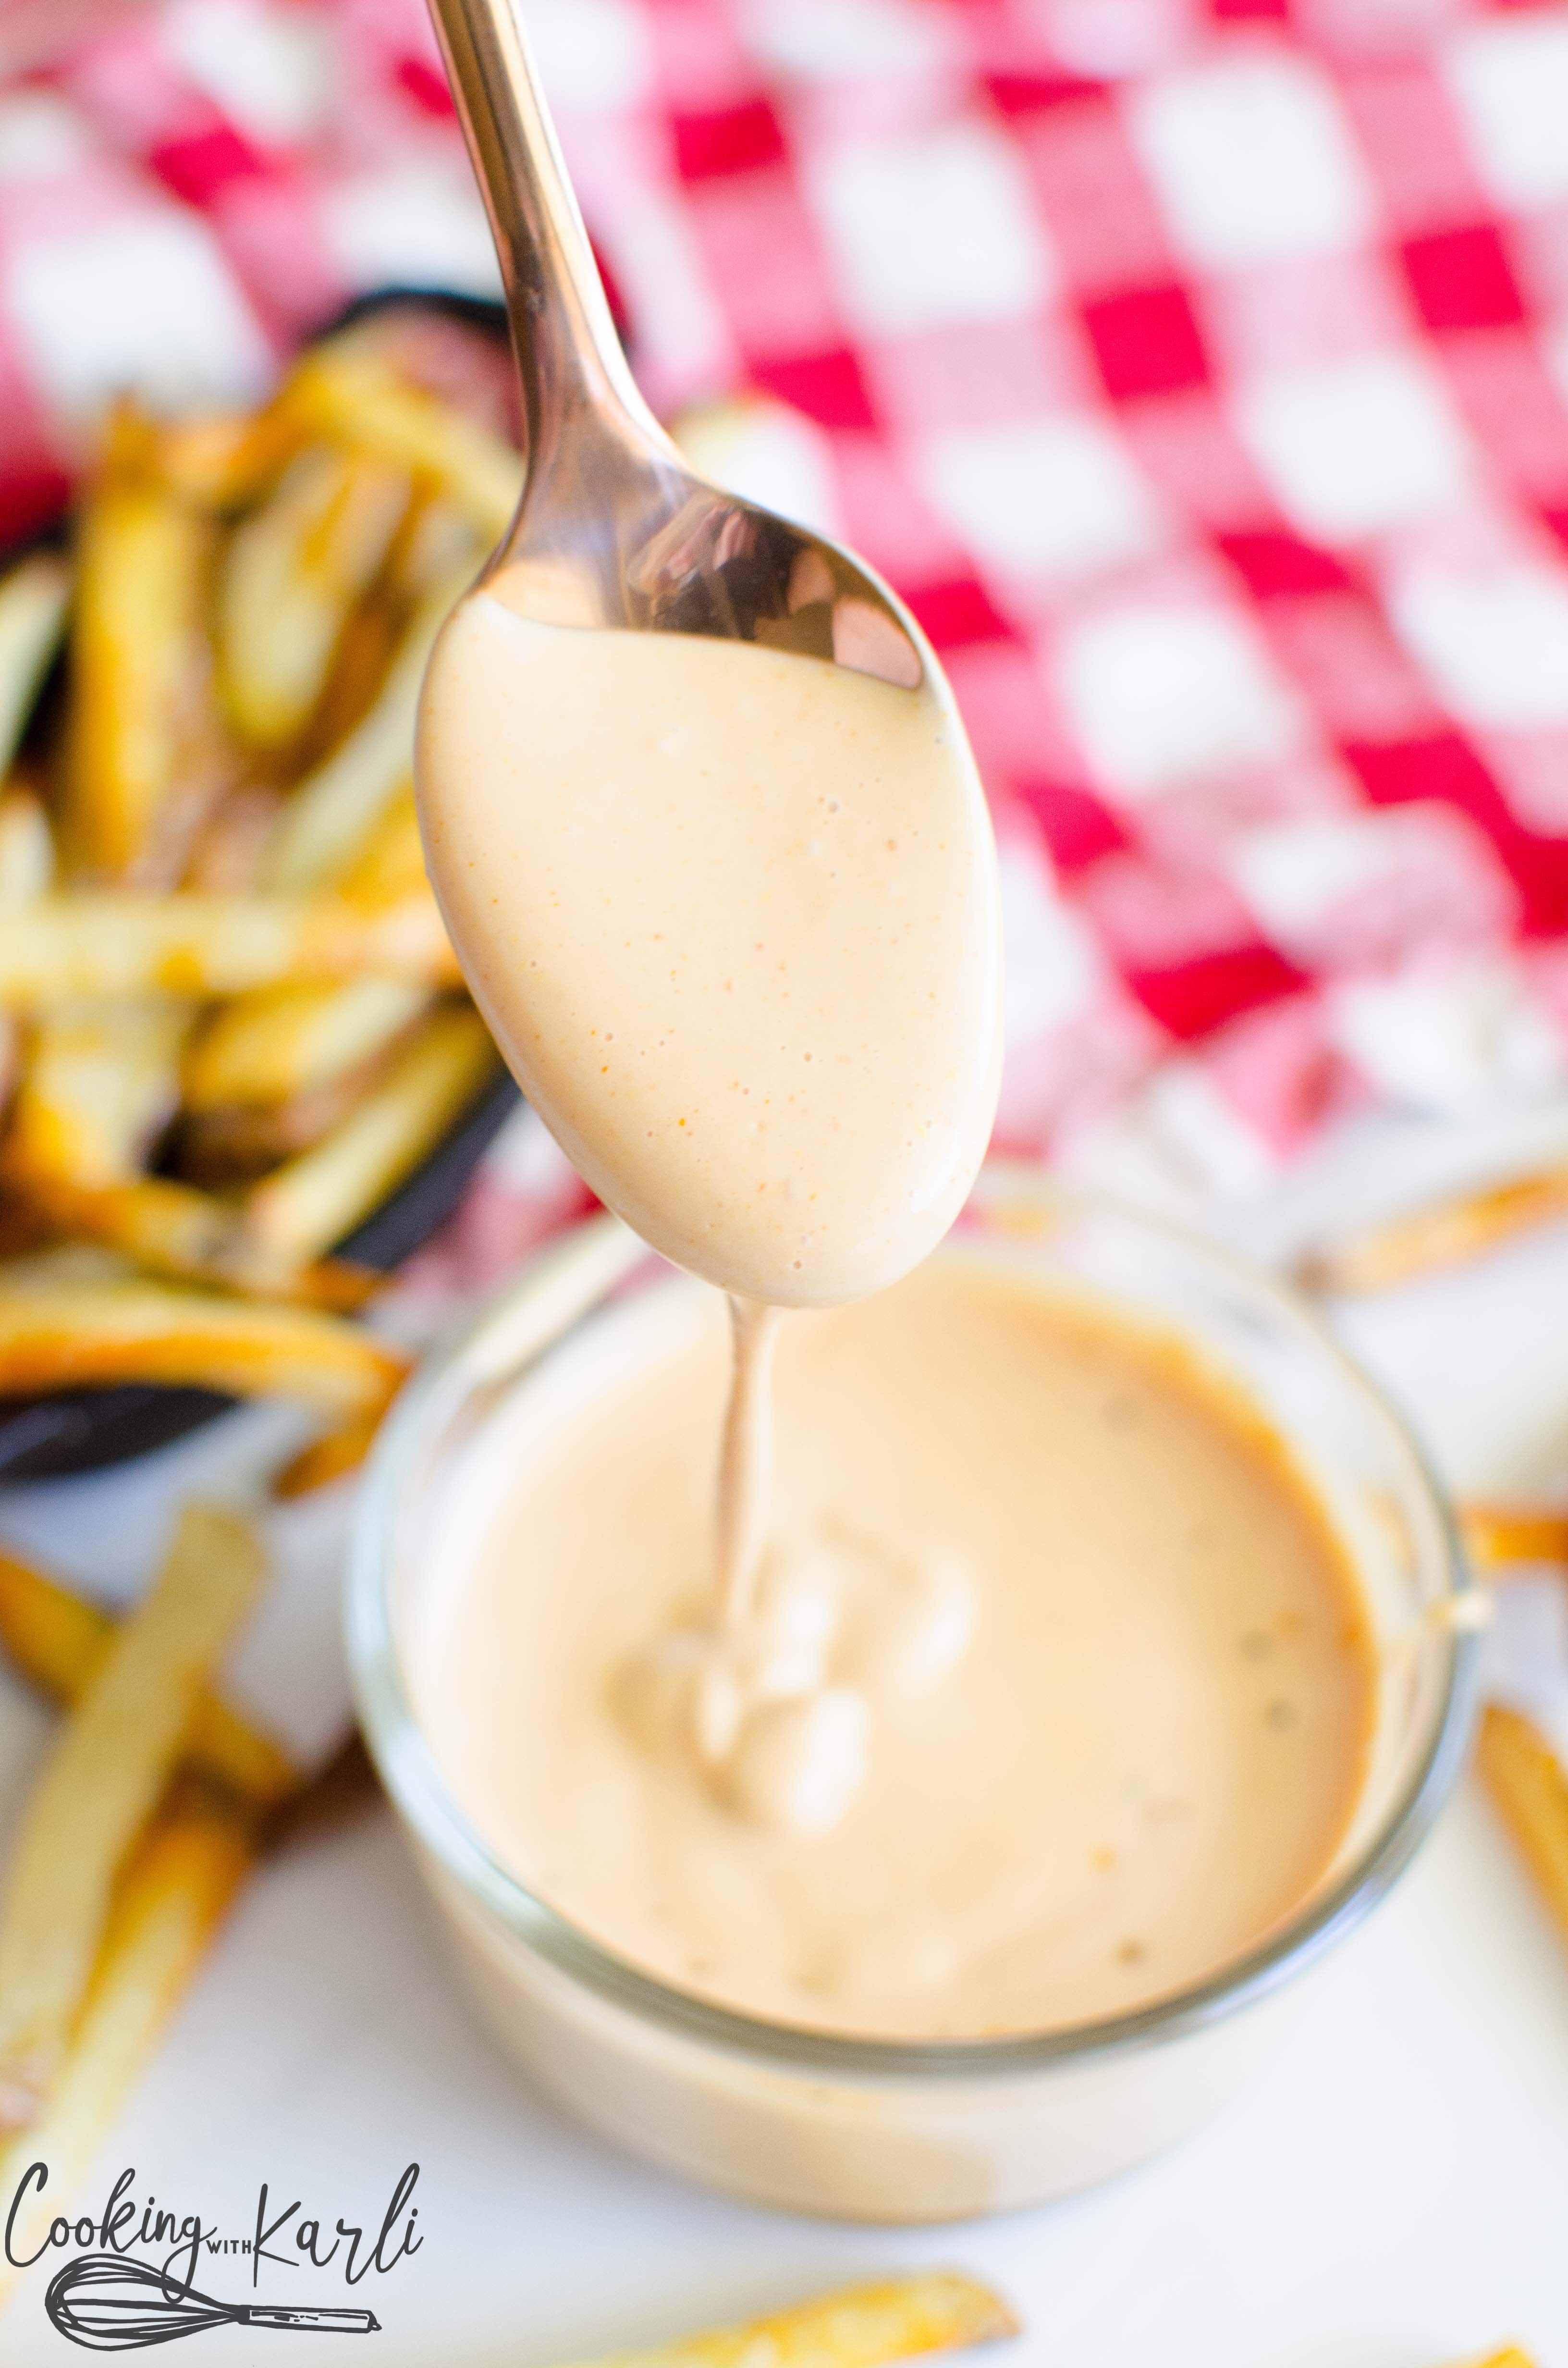 Fry Sauce is great on burgers or with chicken nuggets!